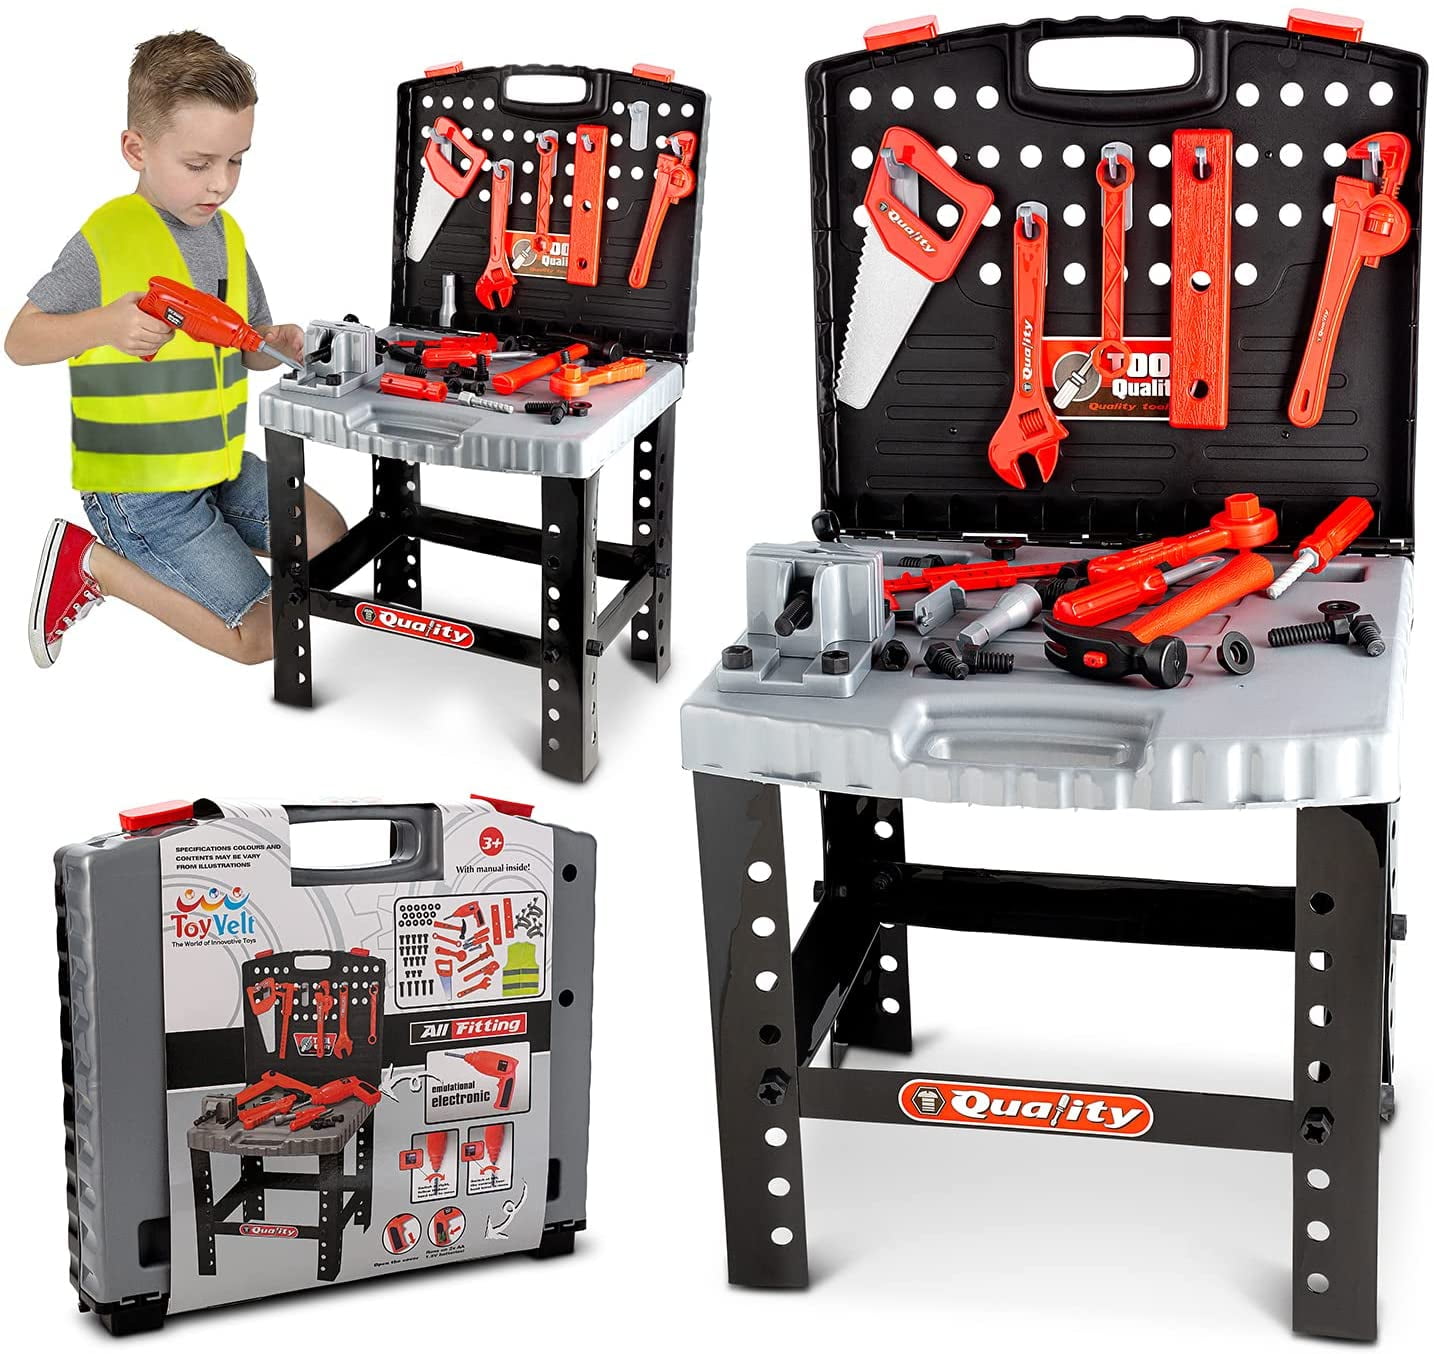 STANLEY Jr Kids' Workbench and 6-Piece Toolset Pretend Toy Construction Play Kit 